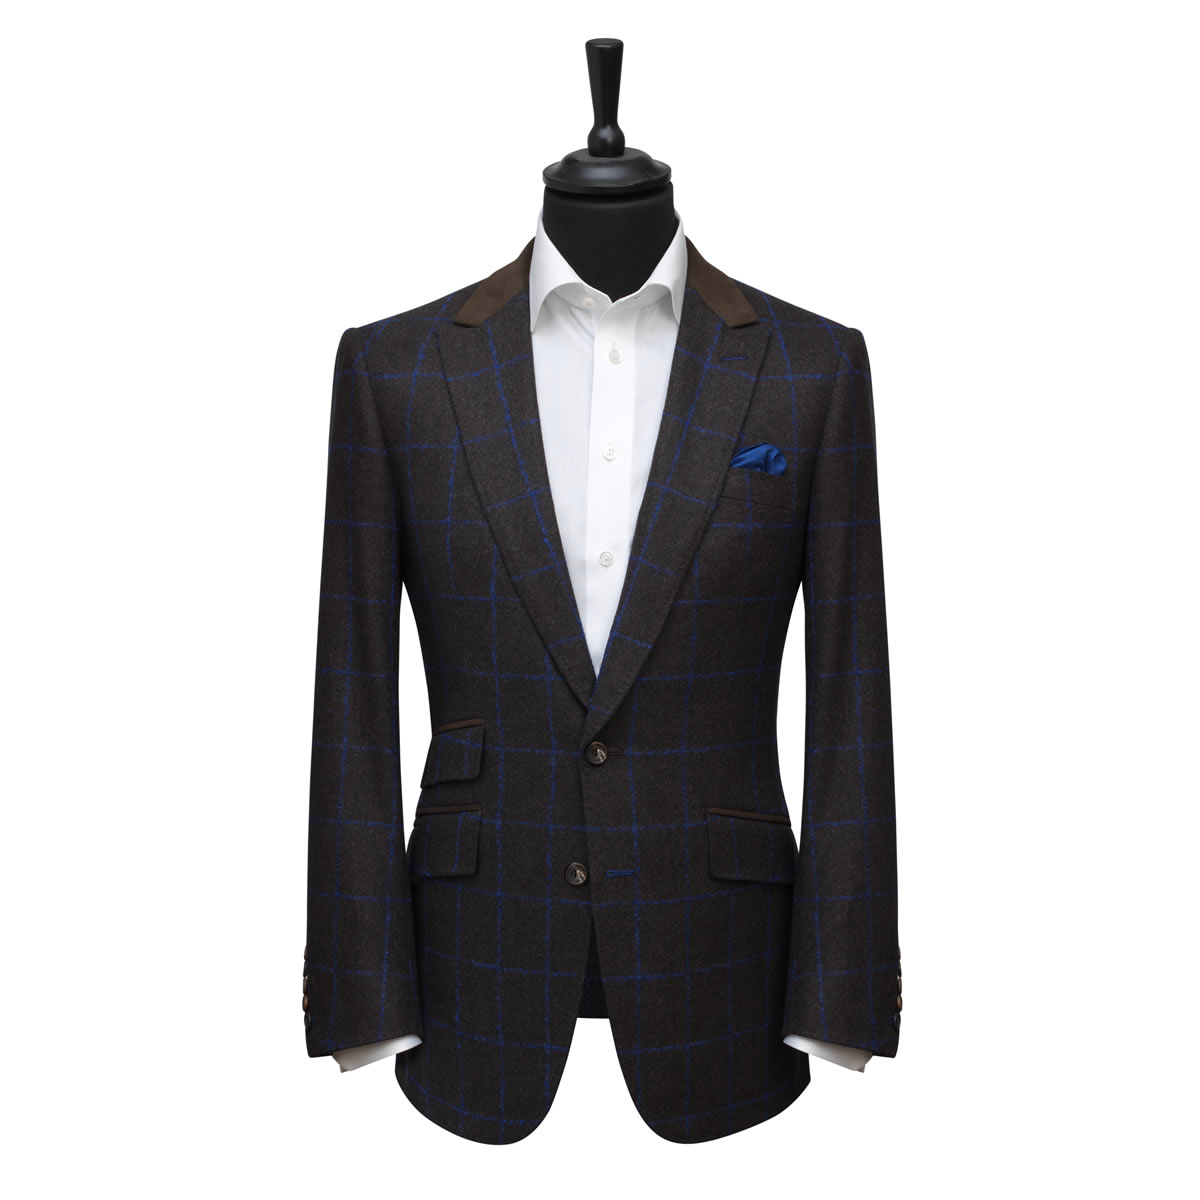 A gallery of our tailor made suits